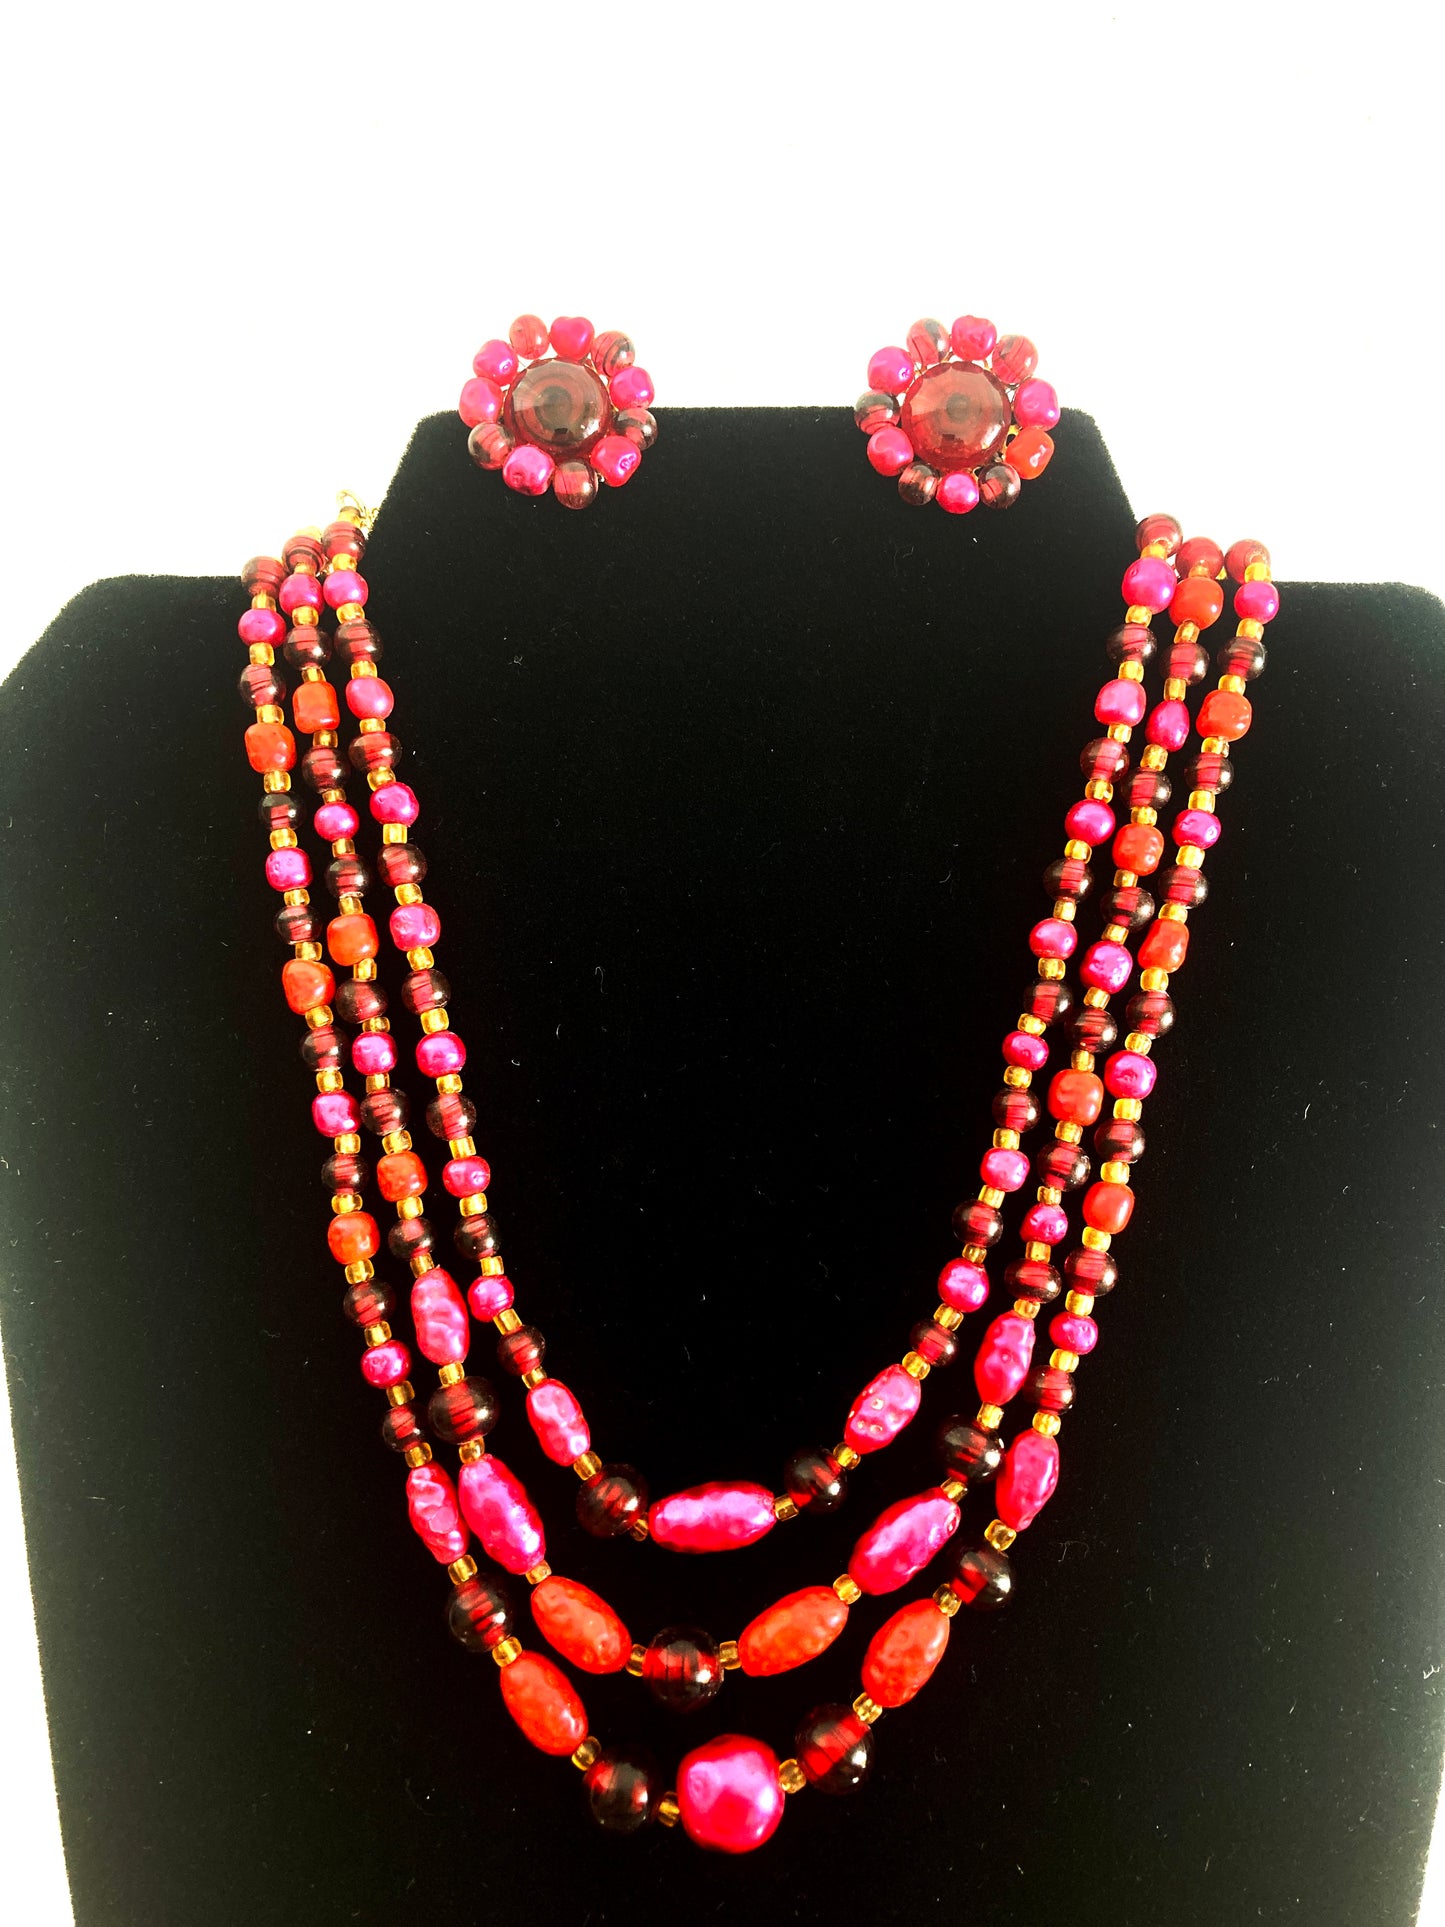 1950s Japan 3 Strand Bead Necklace and Earrings